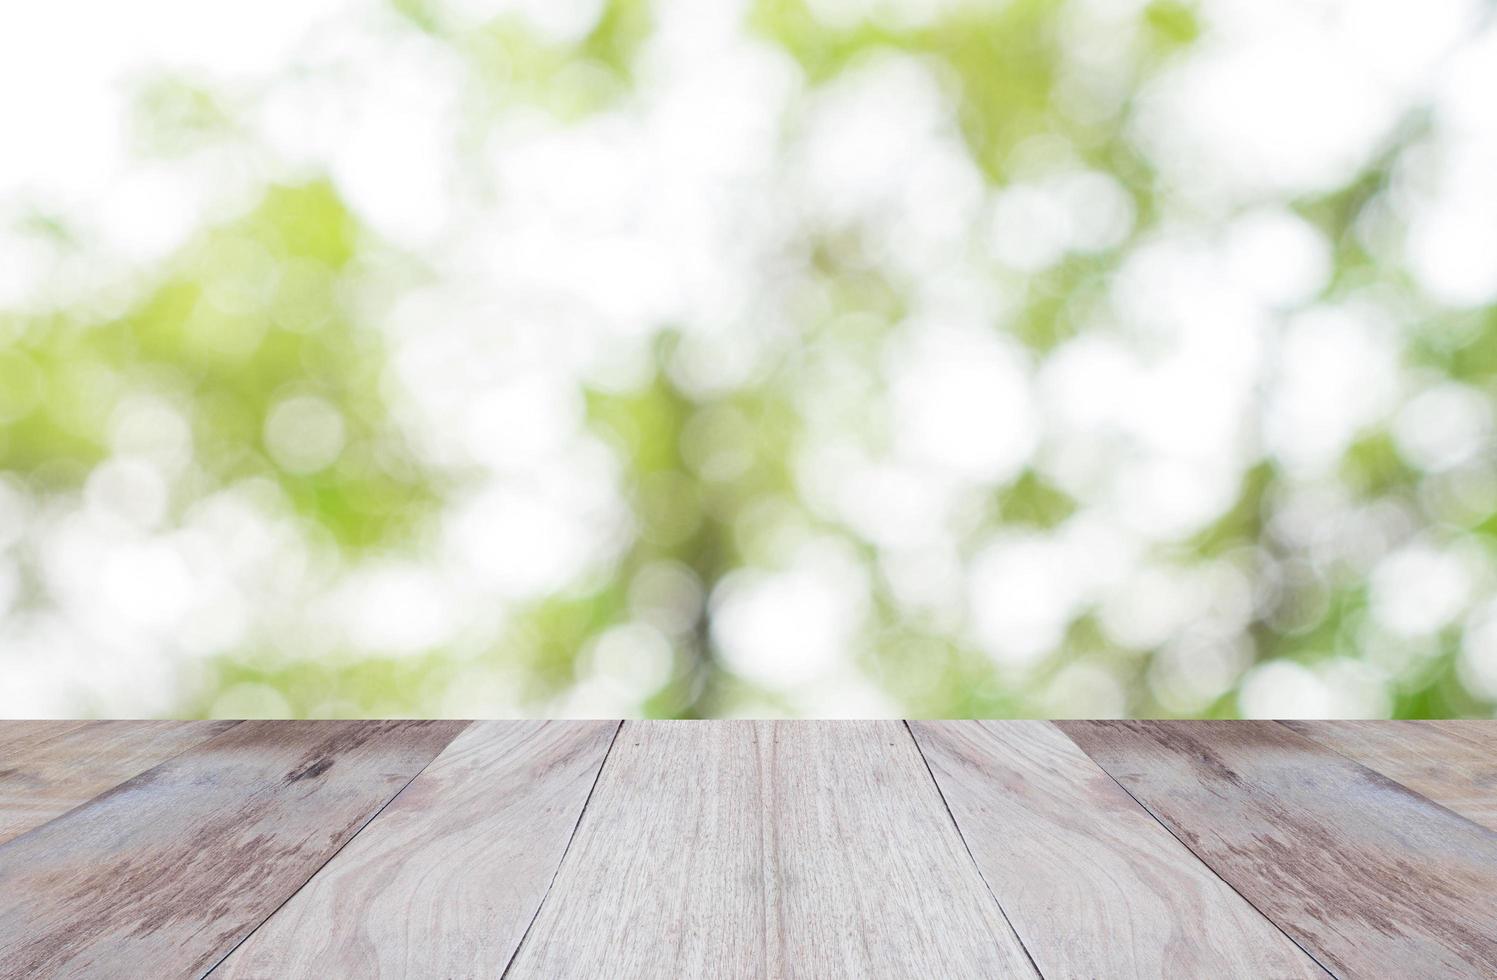 Empty top wooden table and blur nature with bokeh background. photo